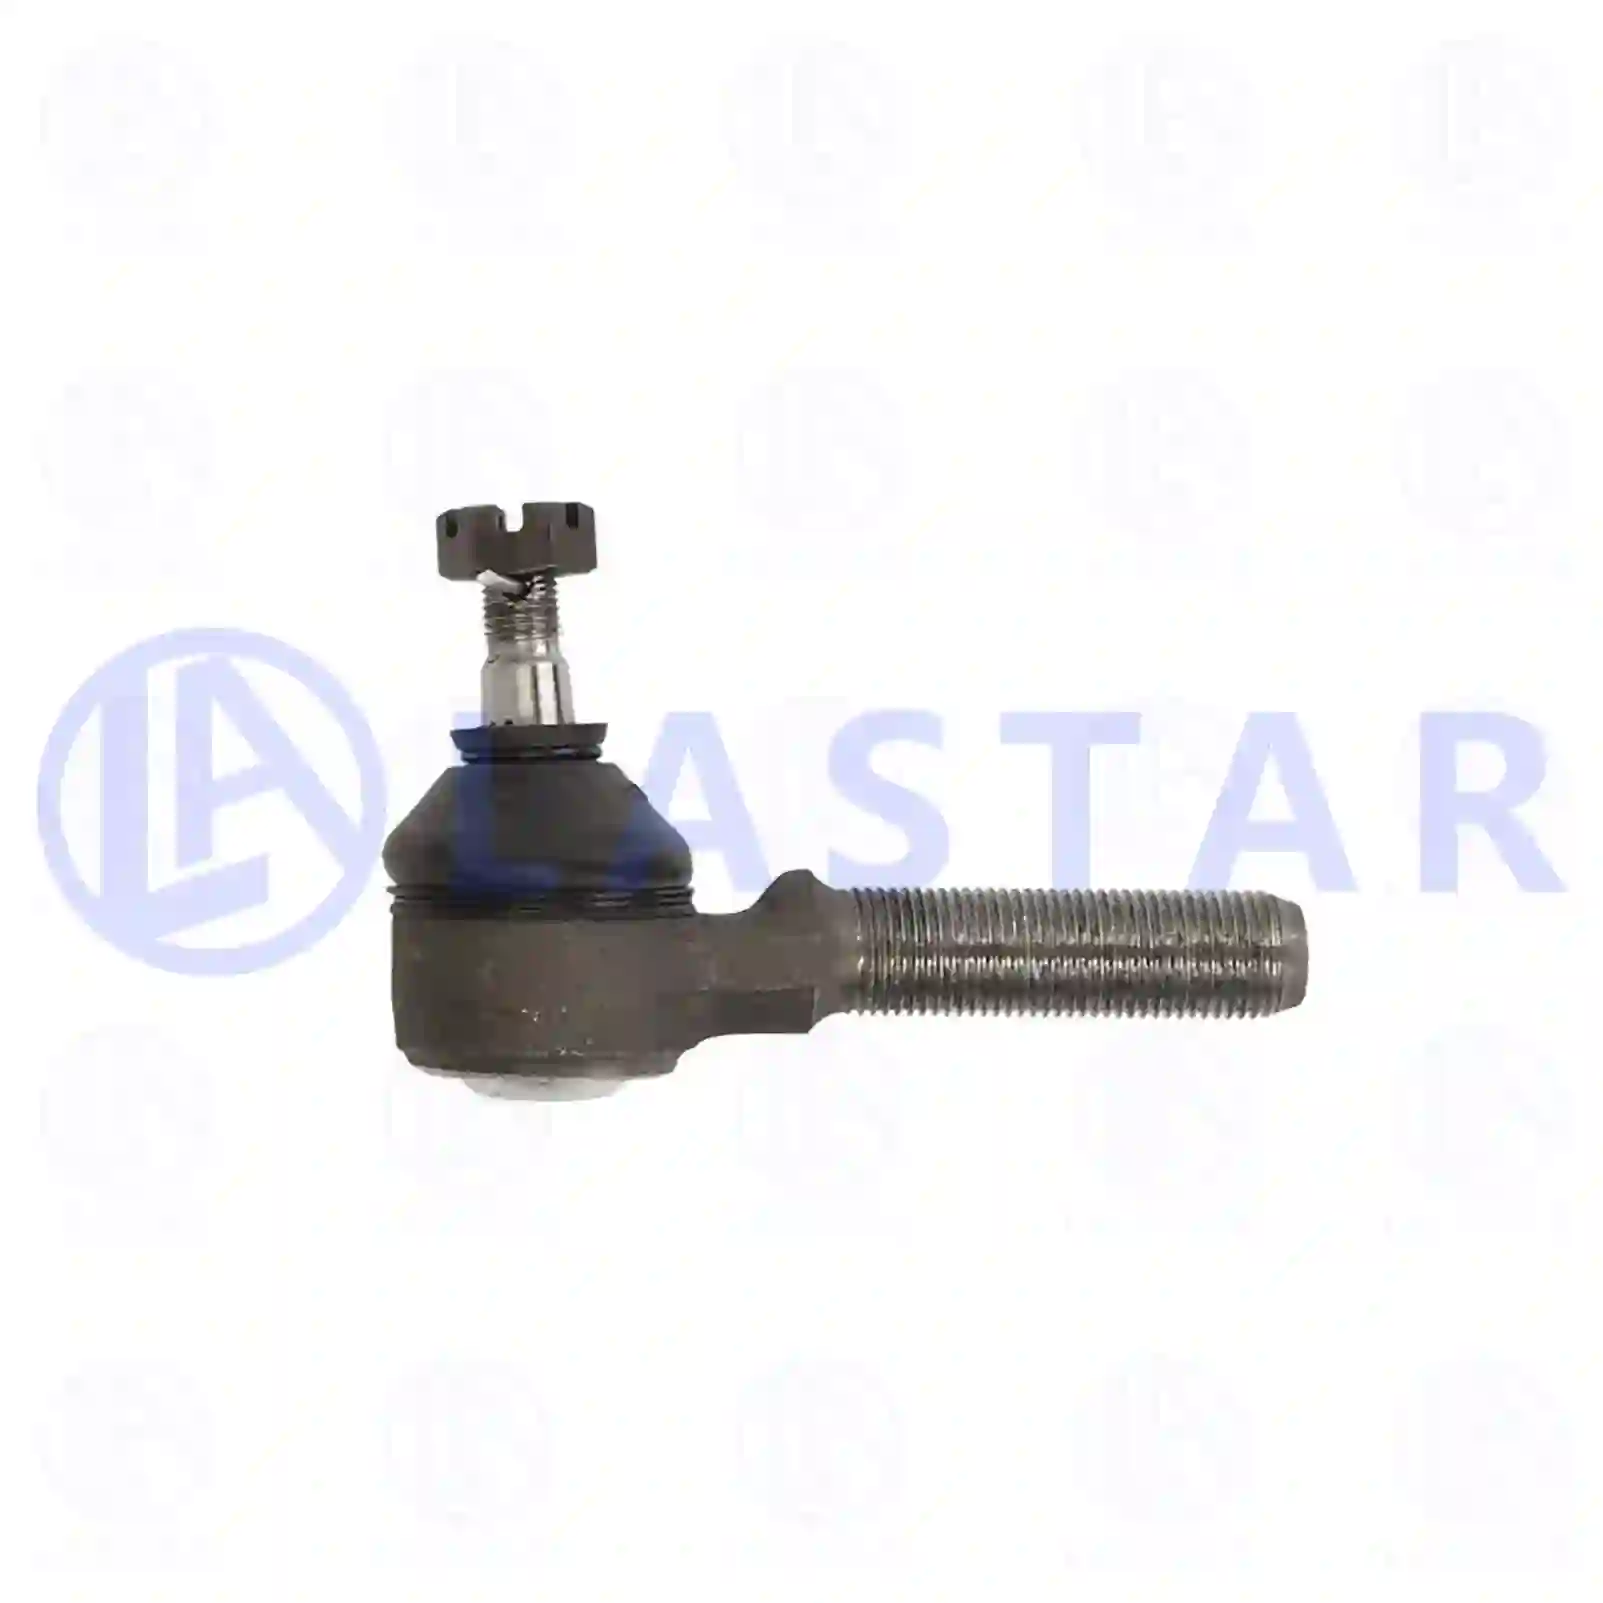 Ball joint, right hand thread, 77733486, 42042912, 03435788, 41218482, 42042912 ||  77733486 Lastar Spare Part | Truck Spare Parts, Auotomotive Spare Parts Ball joint, right hand thread, 77733486, 42042912, 03435788, 41218482, 42042912 ||  77733486 Lastar Spare Part | Truck Spare Parts, Auotomotive Spare Parts